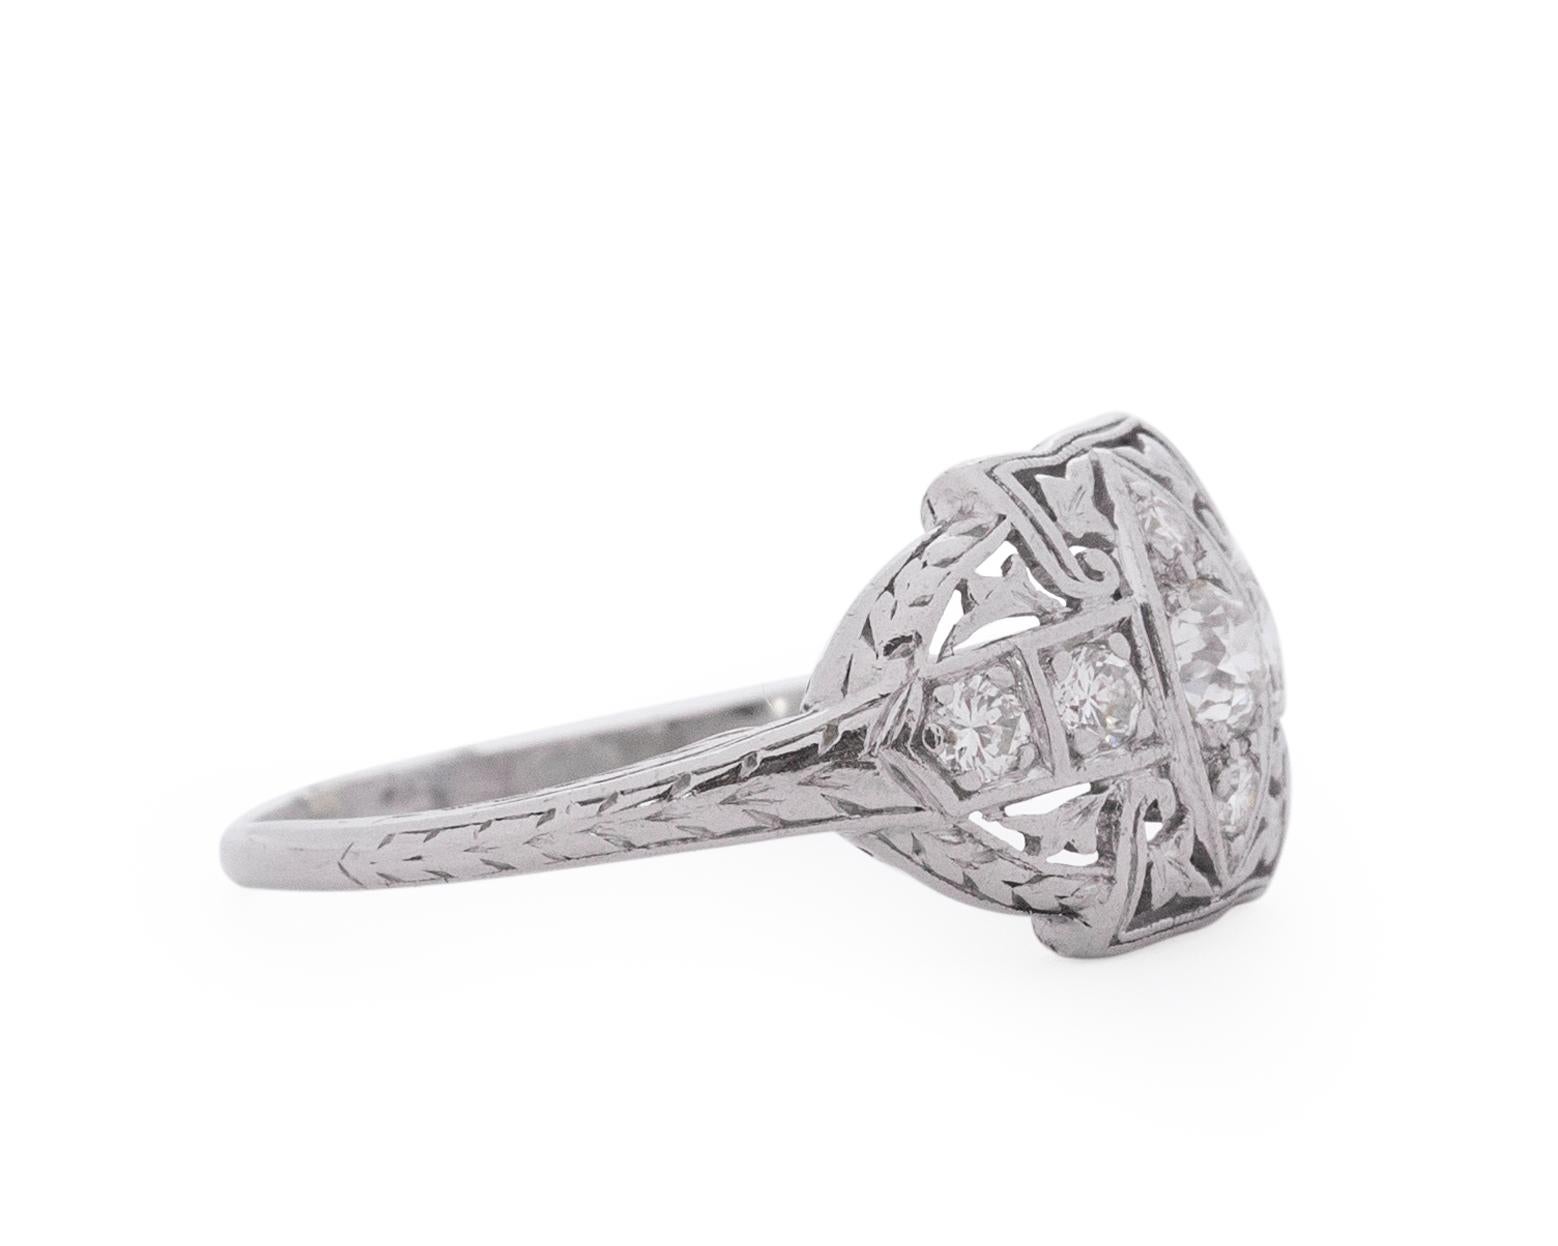 Item Details: 
Ring Size: 8.5
Metal Type: Platinum [Hallmarked, and Tested]
Weight: 2 grams

Diamond Details:
Weight: .25 Carat Total Weight
Cut: Old European Brilliant
Color: G
Clarity: VS

Finger to Top of Stone Measurement: 3.5mm
Condition: